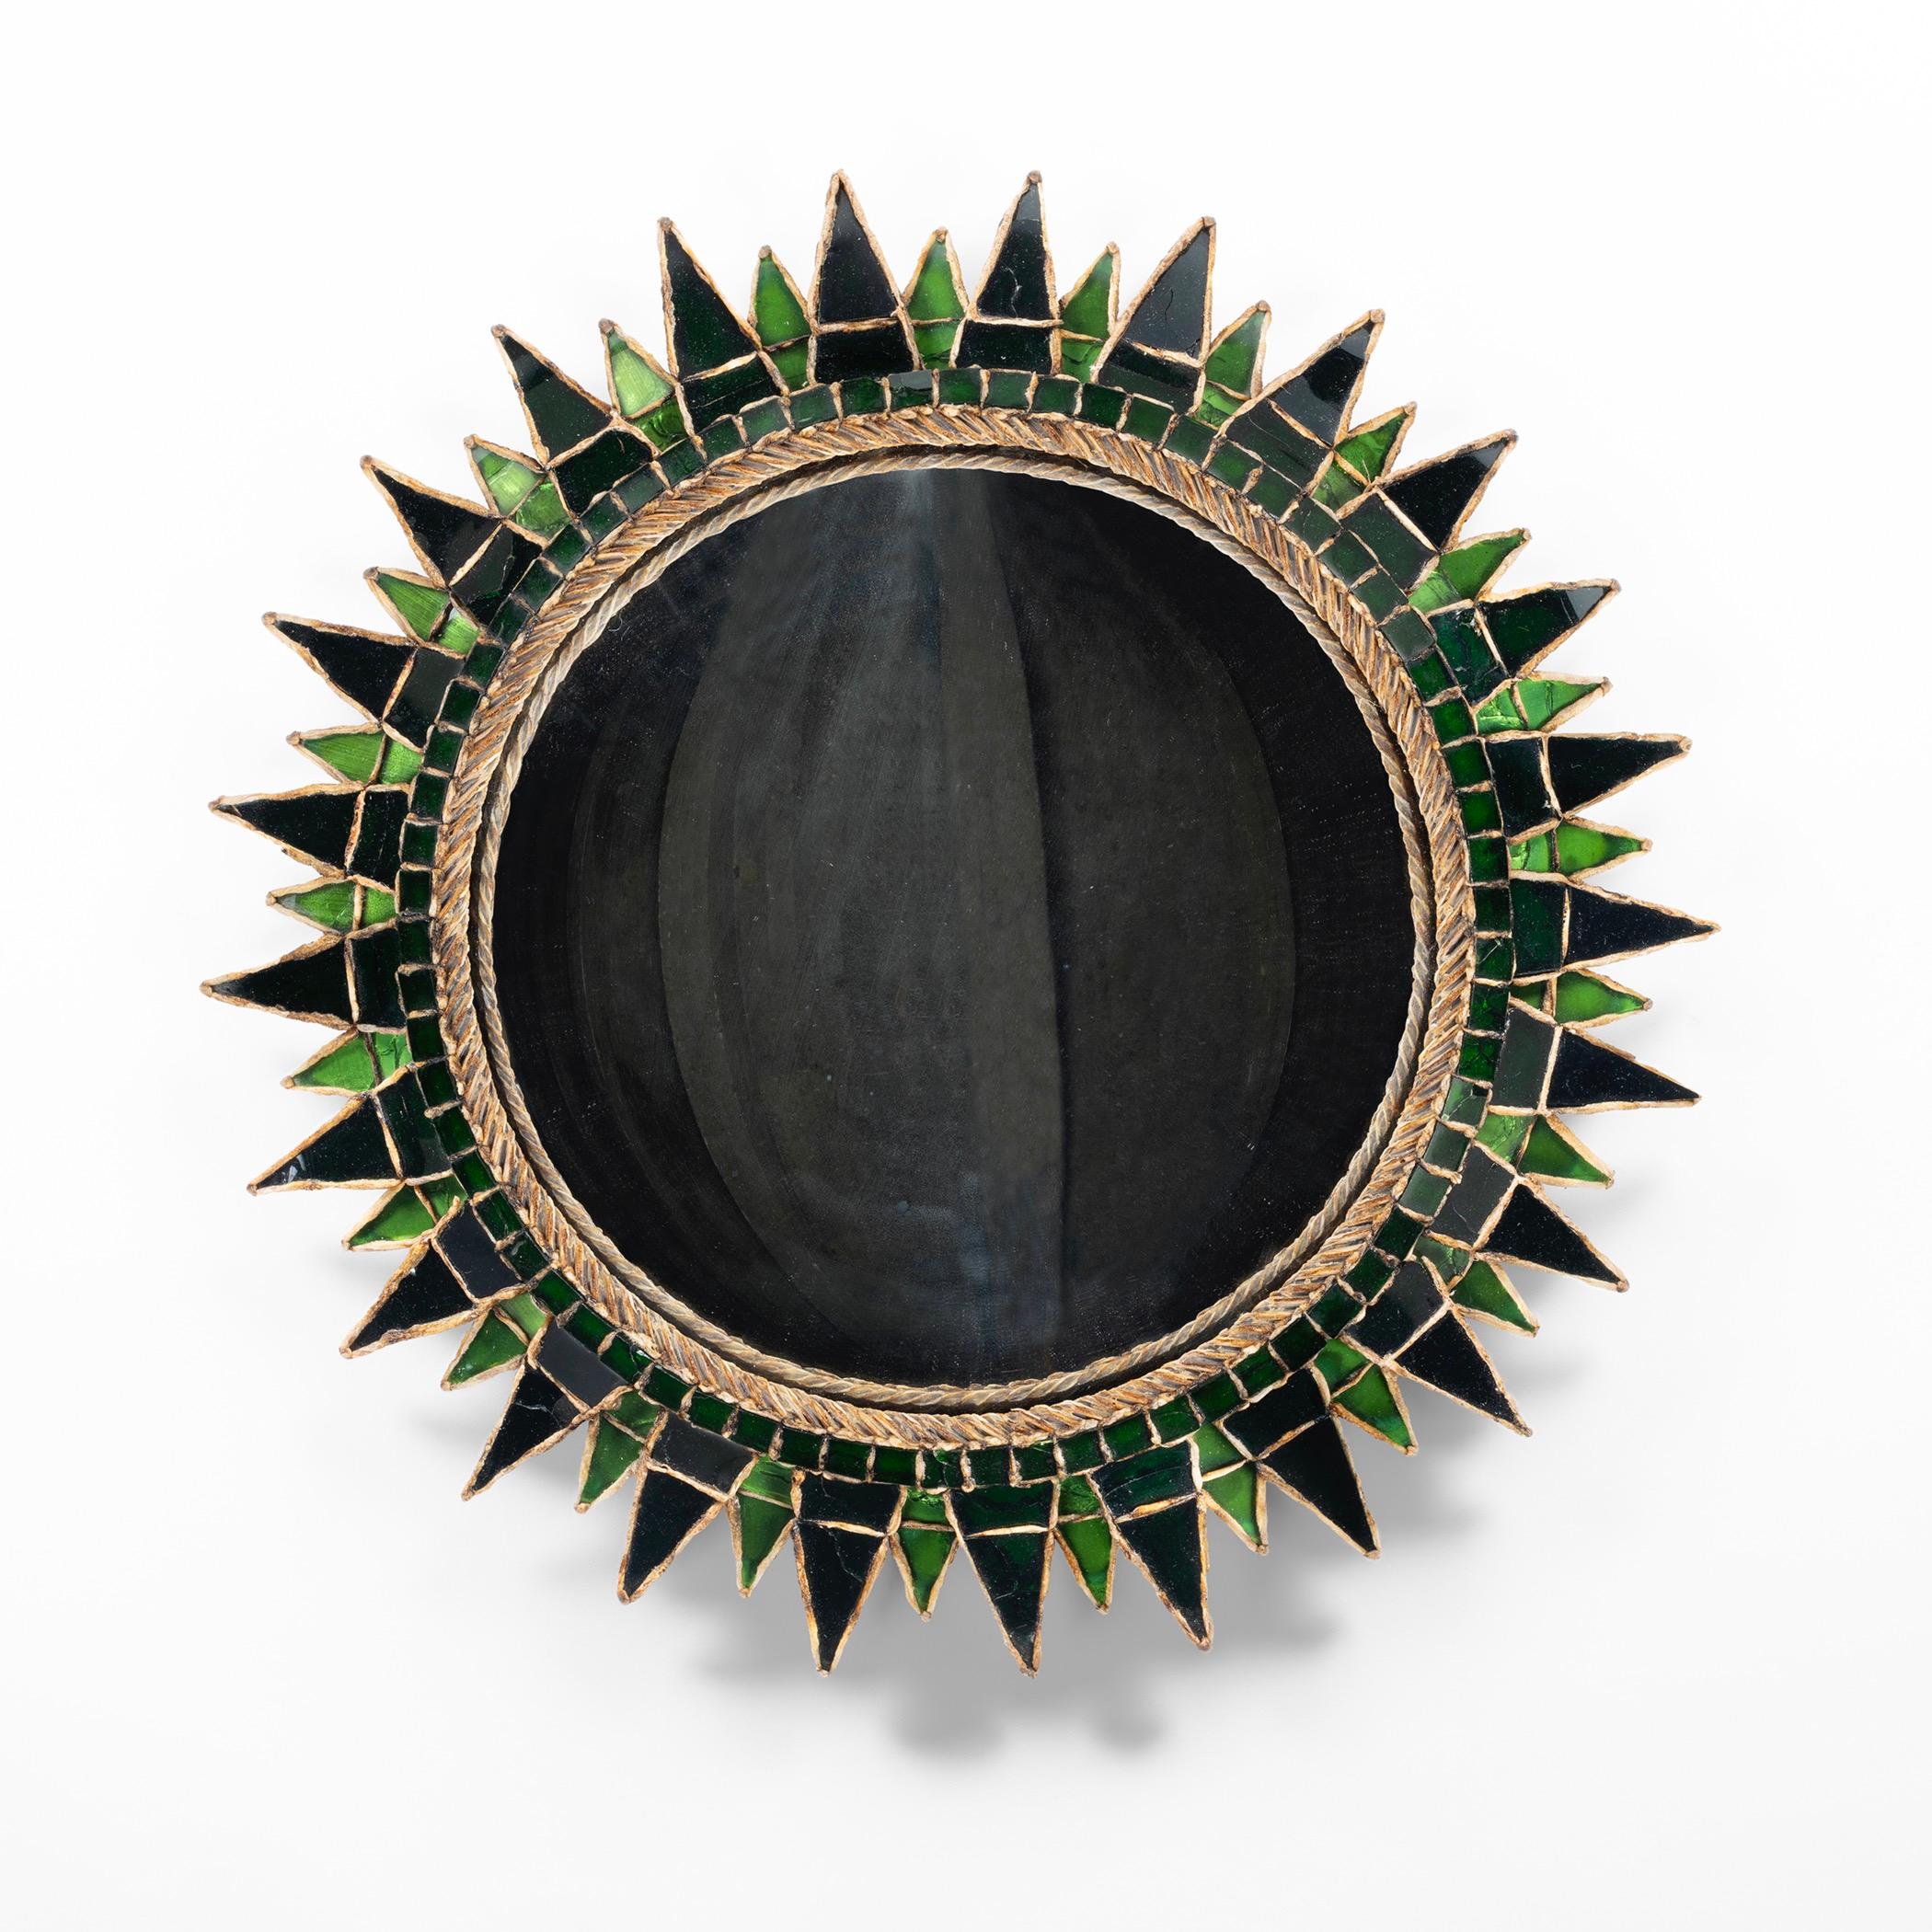 Soleil à pointes (Spiked sun) by Line Vautrin – Talosel mirror inlaid with alternating light green and dark green colored mirrors (shape number 3).

Soleil à pointes (Spiked sun), talosel mirror inlaid with alternating light green and dark green